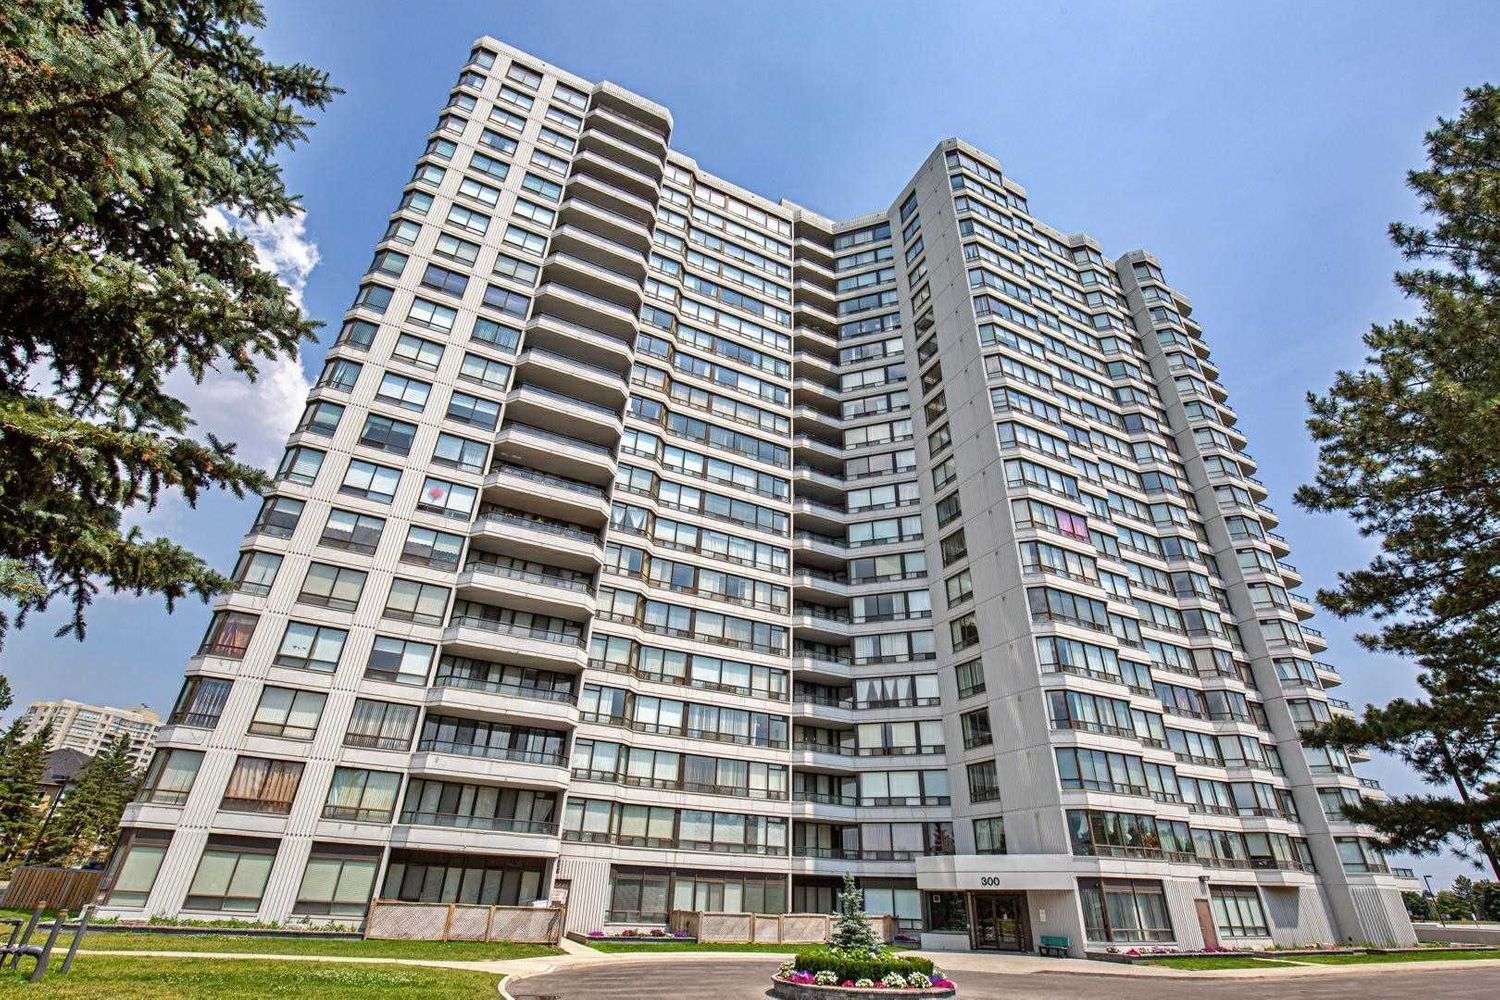 300 Alton Towers Circ. The Ambassadors I Condos is located in  Scarborough, Toronto - image #1 of 2